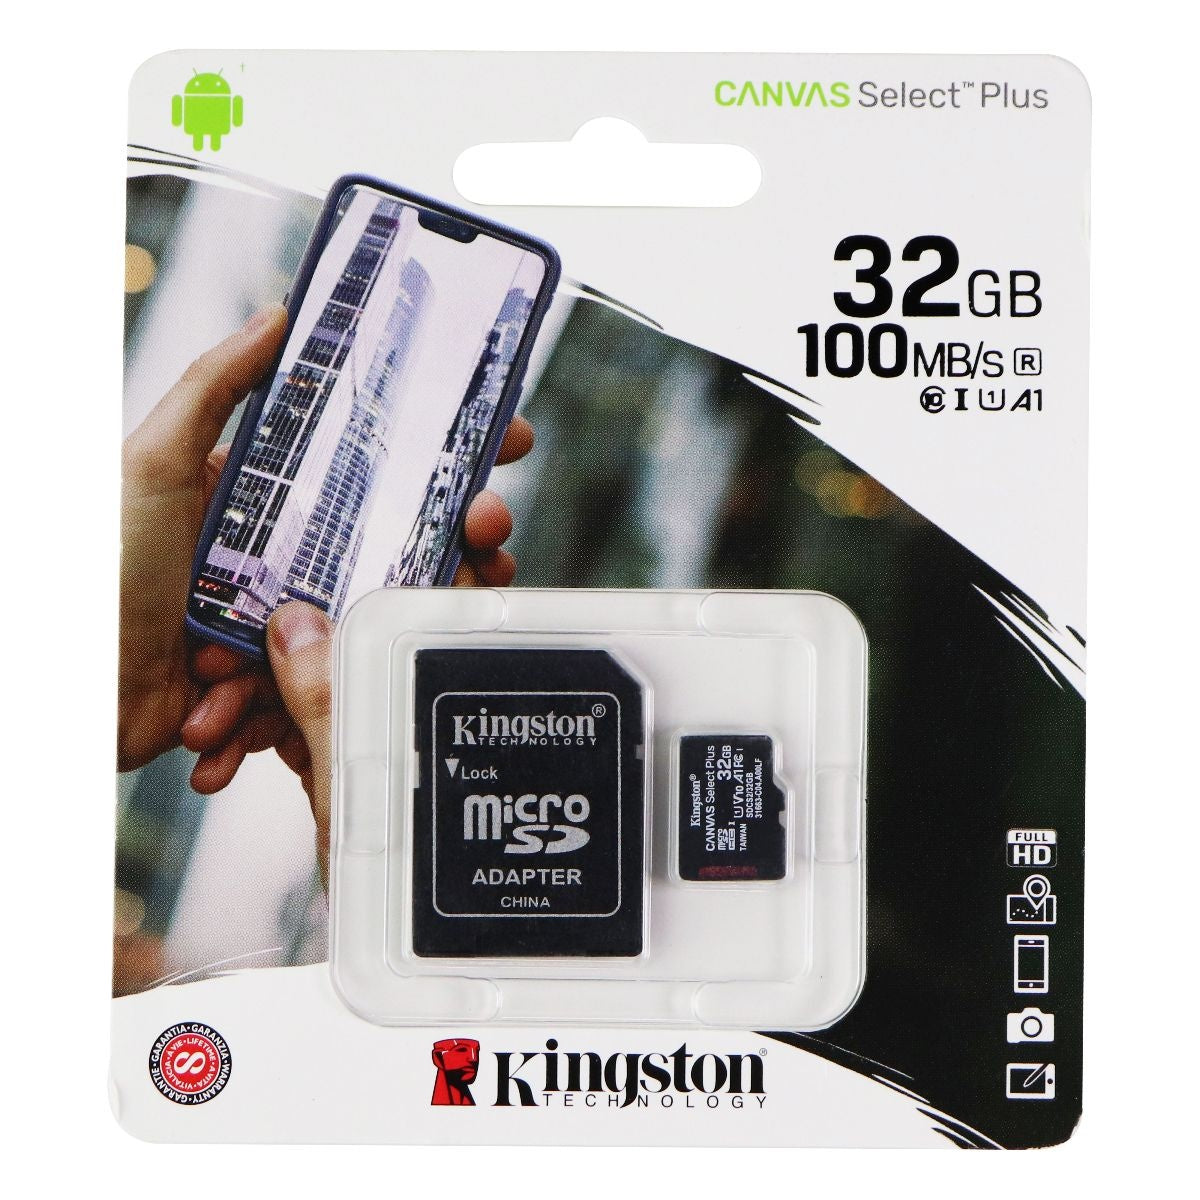 Kingston Canvas Select Plus 32GB microSDHC card with Adapter 100MB/s - Black